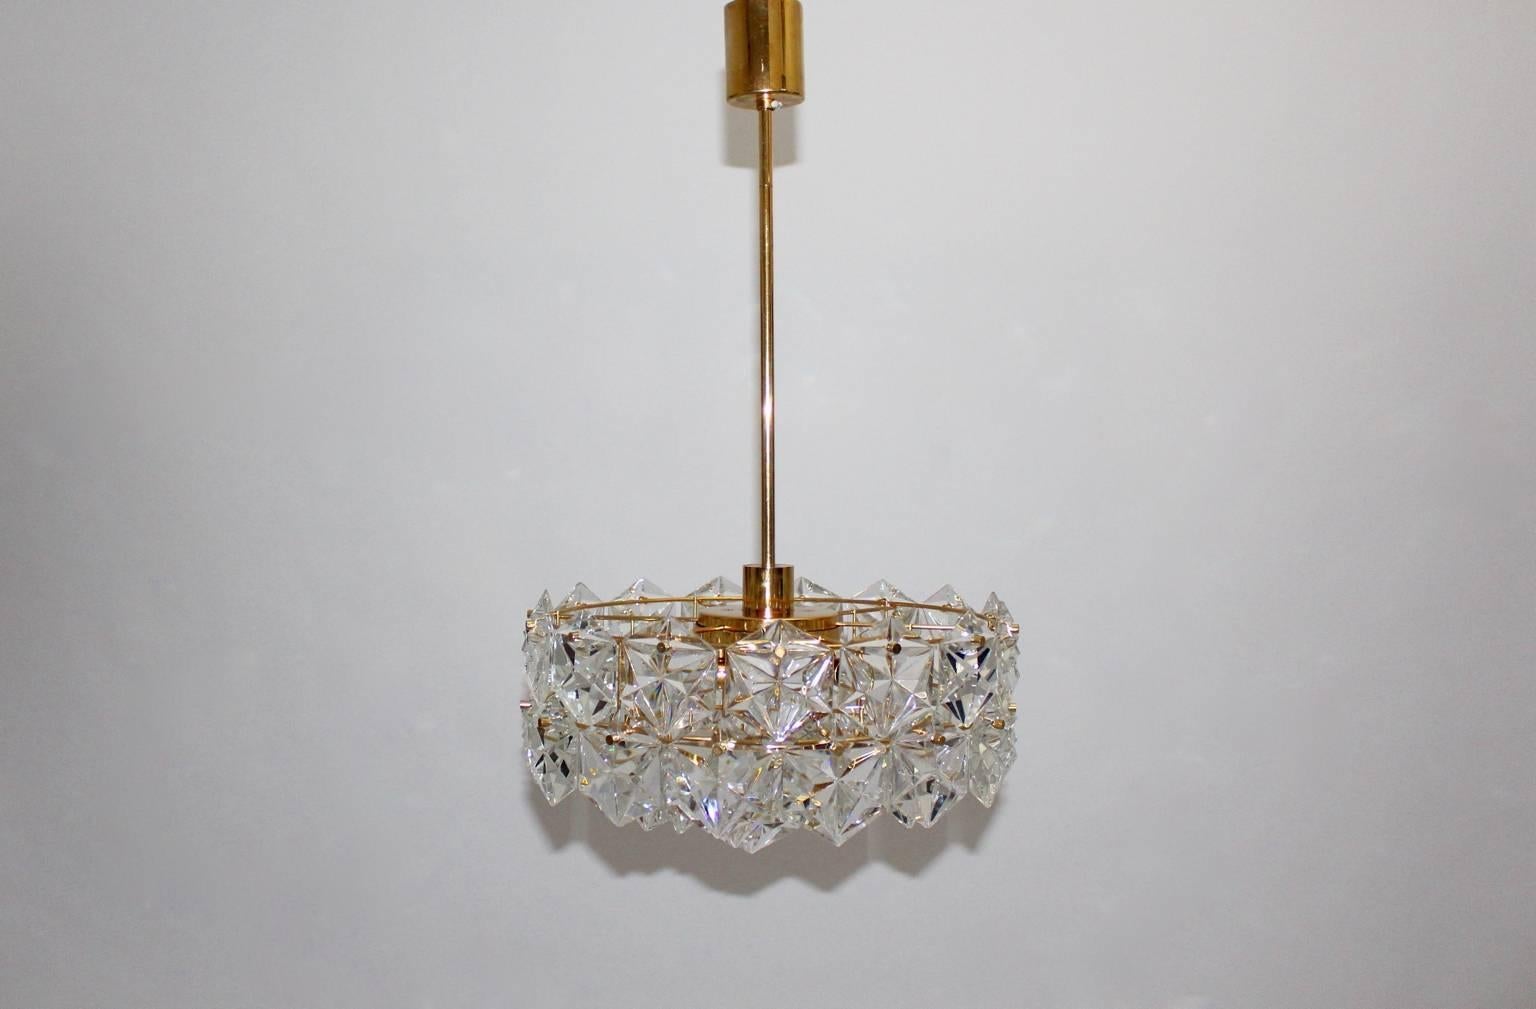 Mid century modern gold plated vintage chandelier labeled by Kinkeldey, Germany,  which shows 4 tiers with gilt frame and 46 facetted hexagonal crystals.
Fittings for six sockets E 14 and one fitting for a socket E 27.
The chandelier is in very good